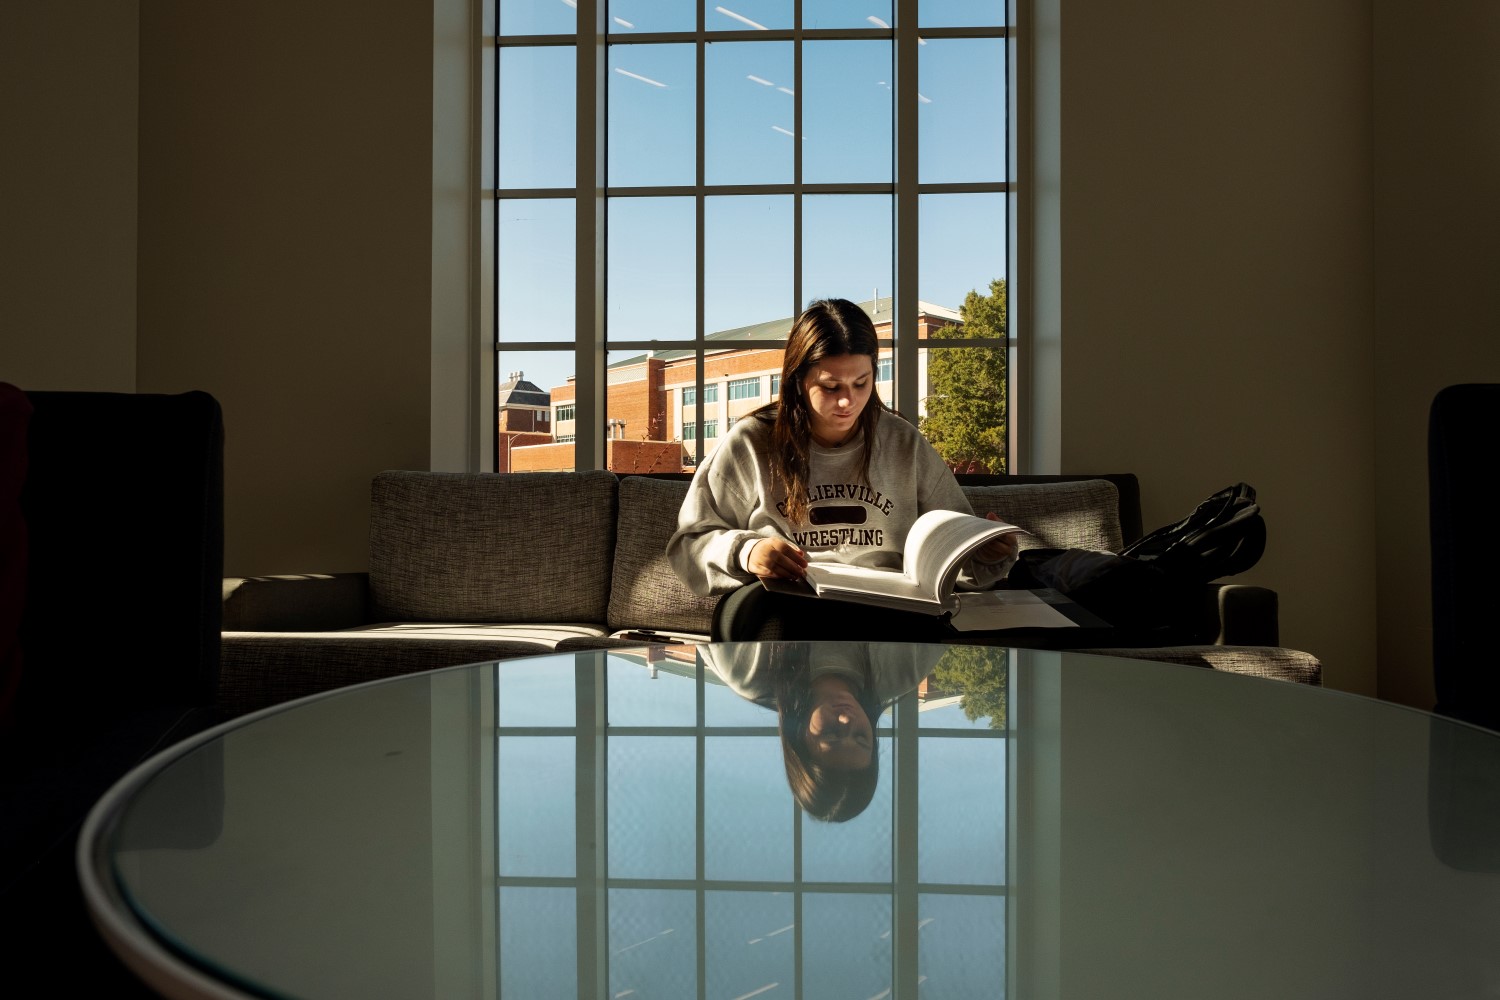 Business administration and marketing sophomore Alexis Fraley of Hernando takes advantage of an ideal study space in the new Richard A. Rula Engineering and Science Complex. The new facility is home to the Rula School of Civil and Environmental Engineering.  